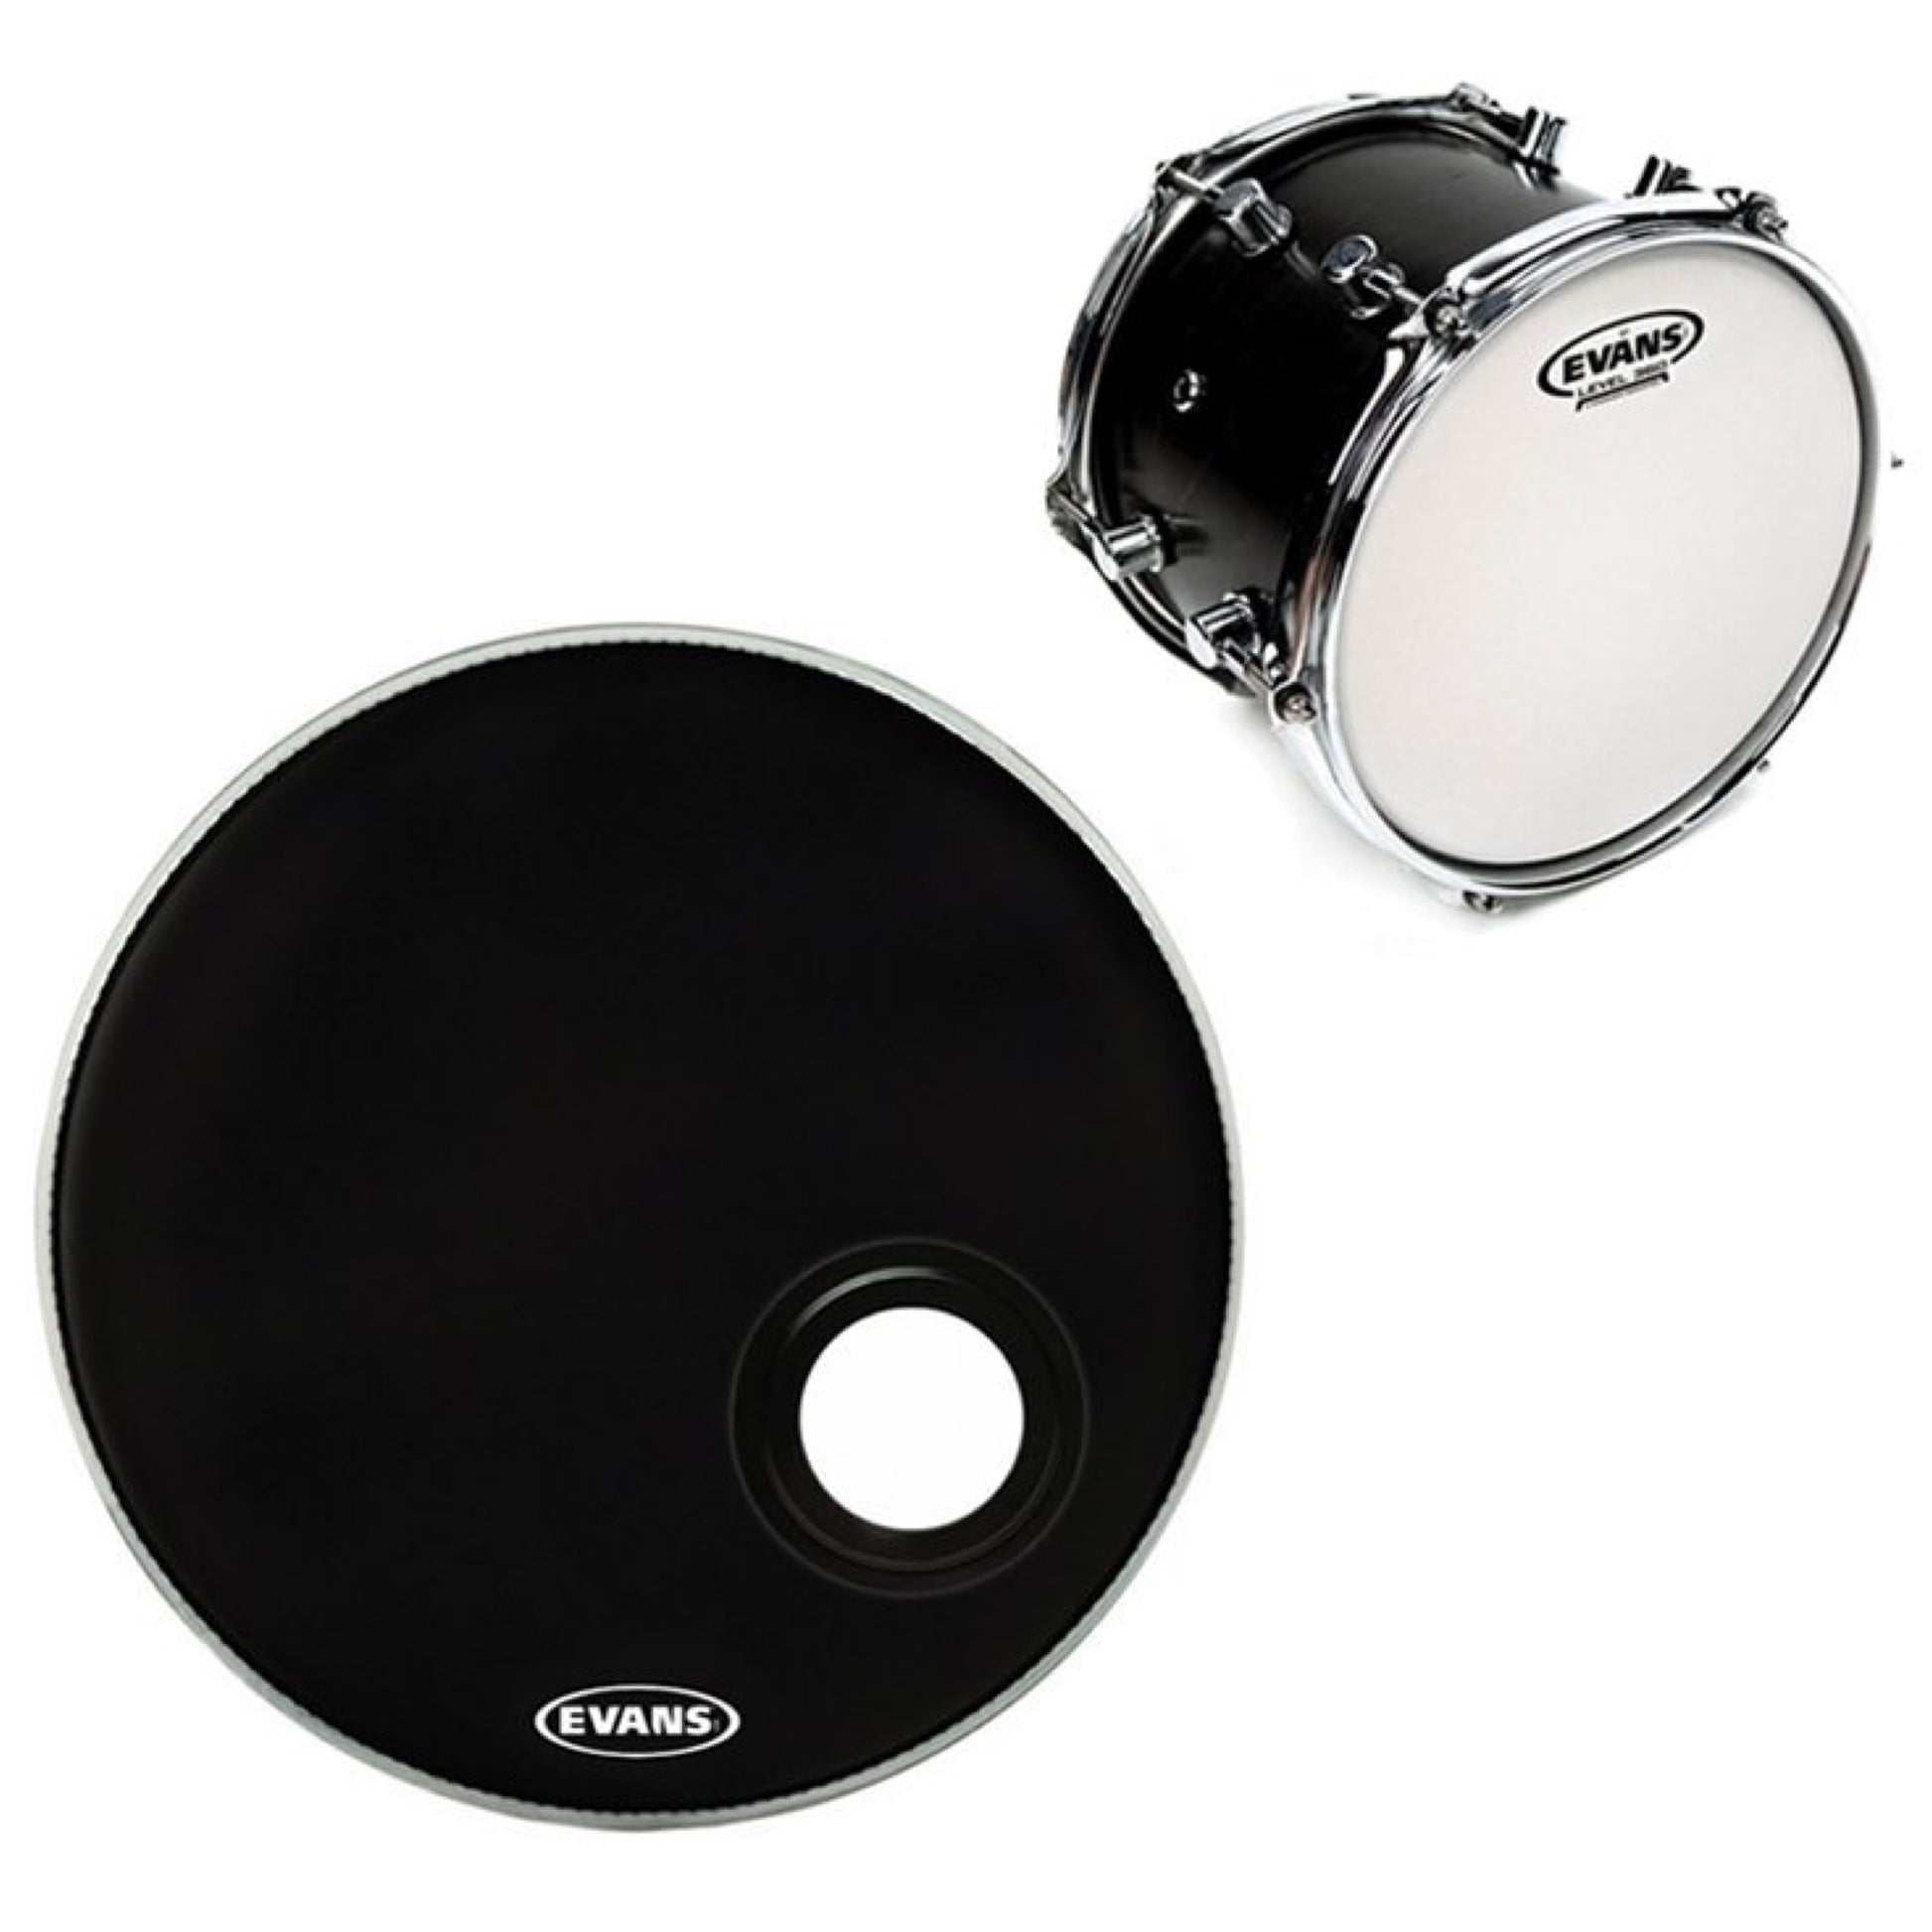 Evans EMAD Resonant Bass Drumhead, Black, with Evans G1 Coated Drum Head, 14 Inch, 22 Inch